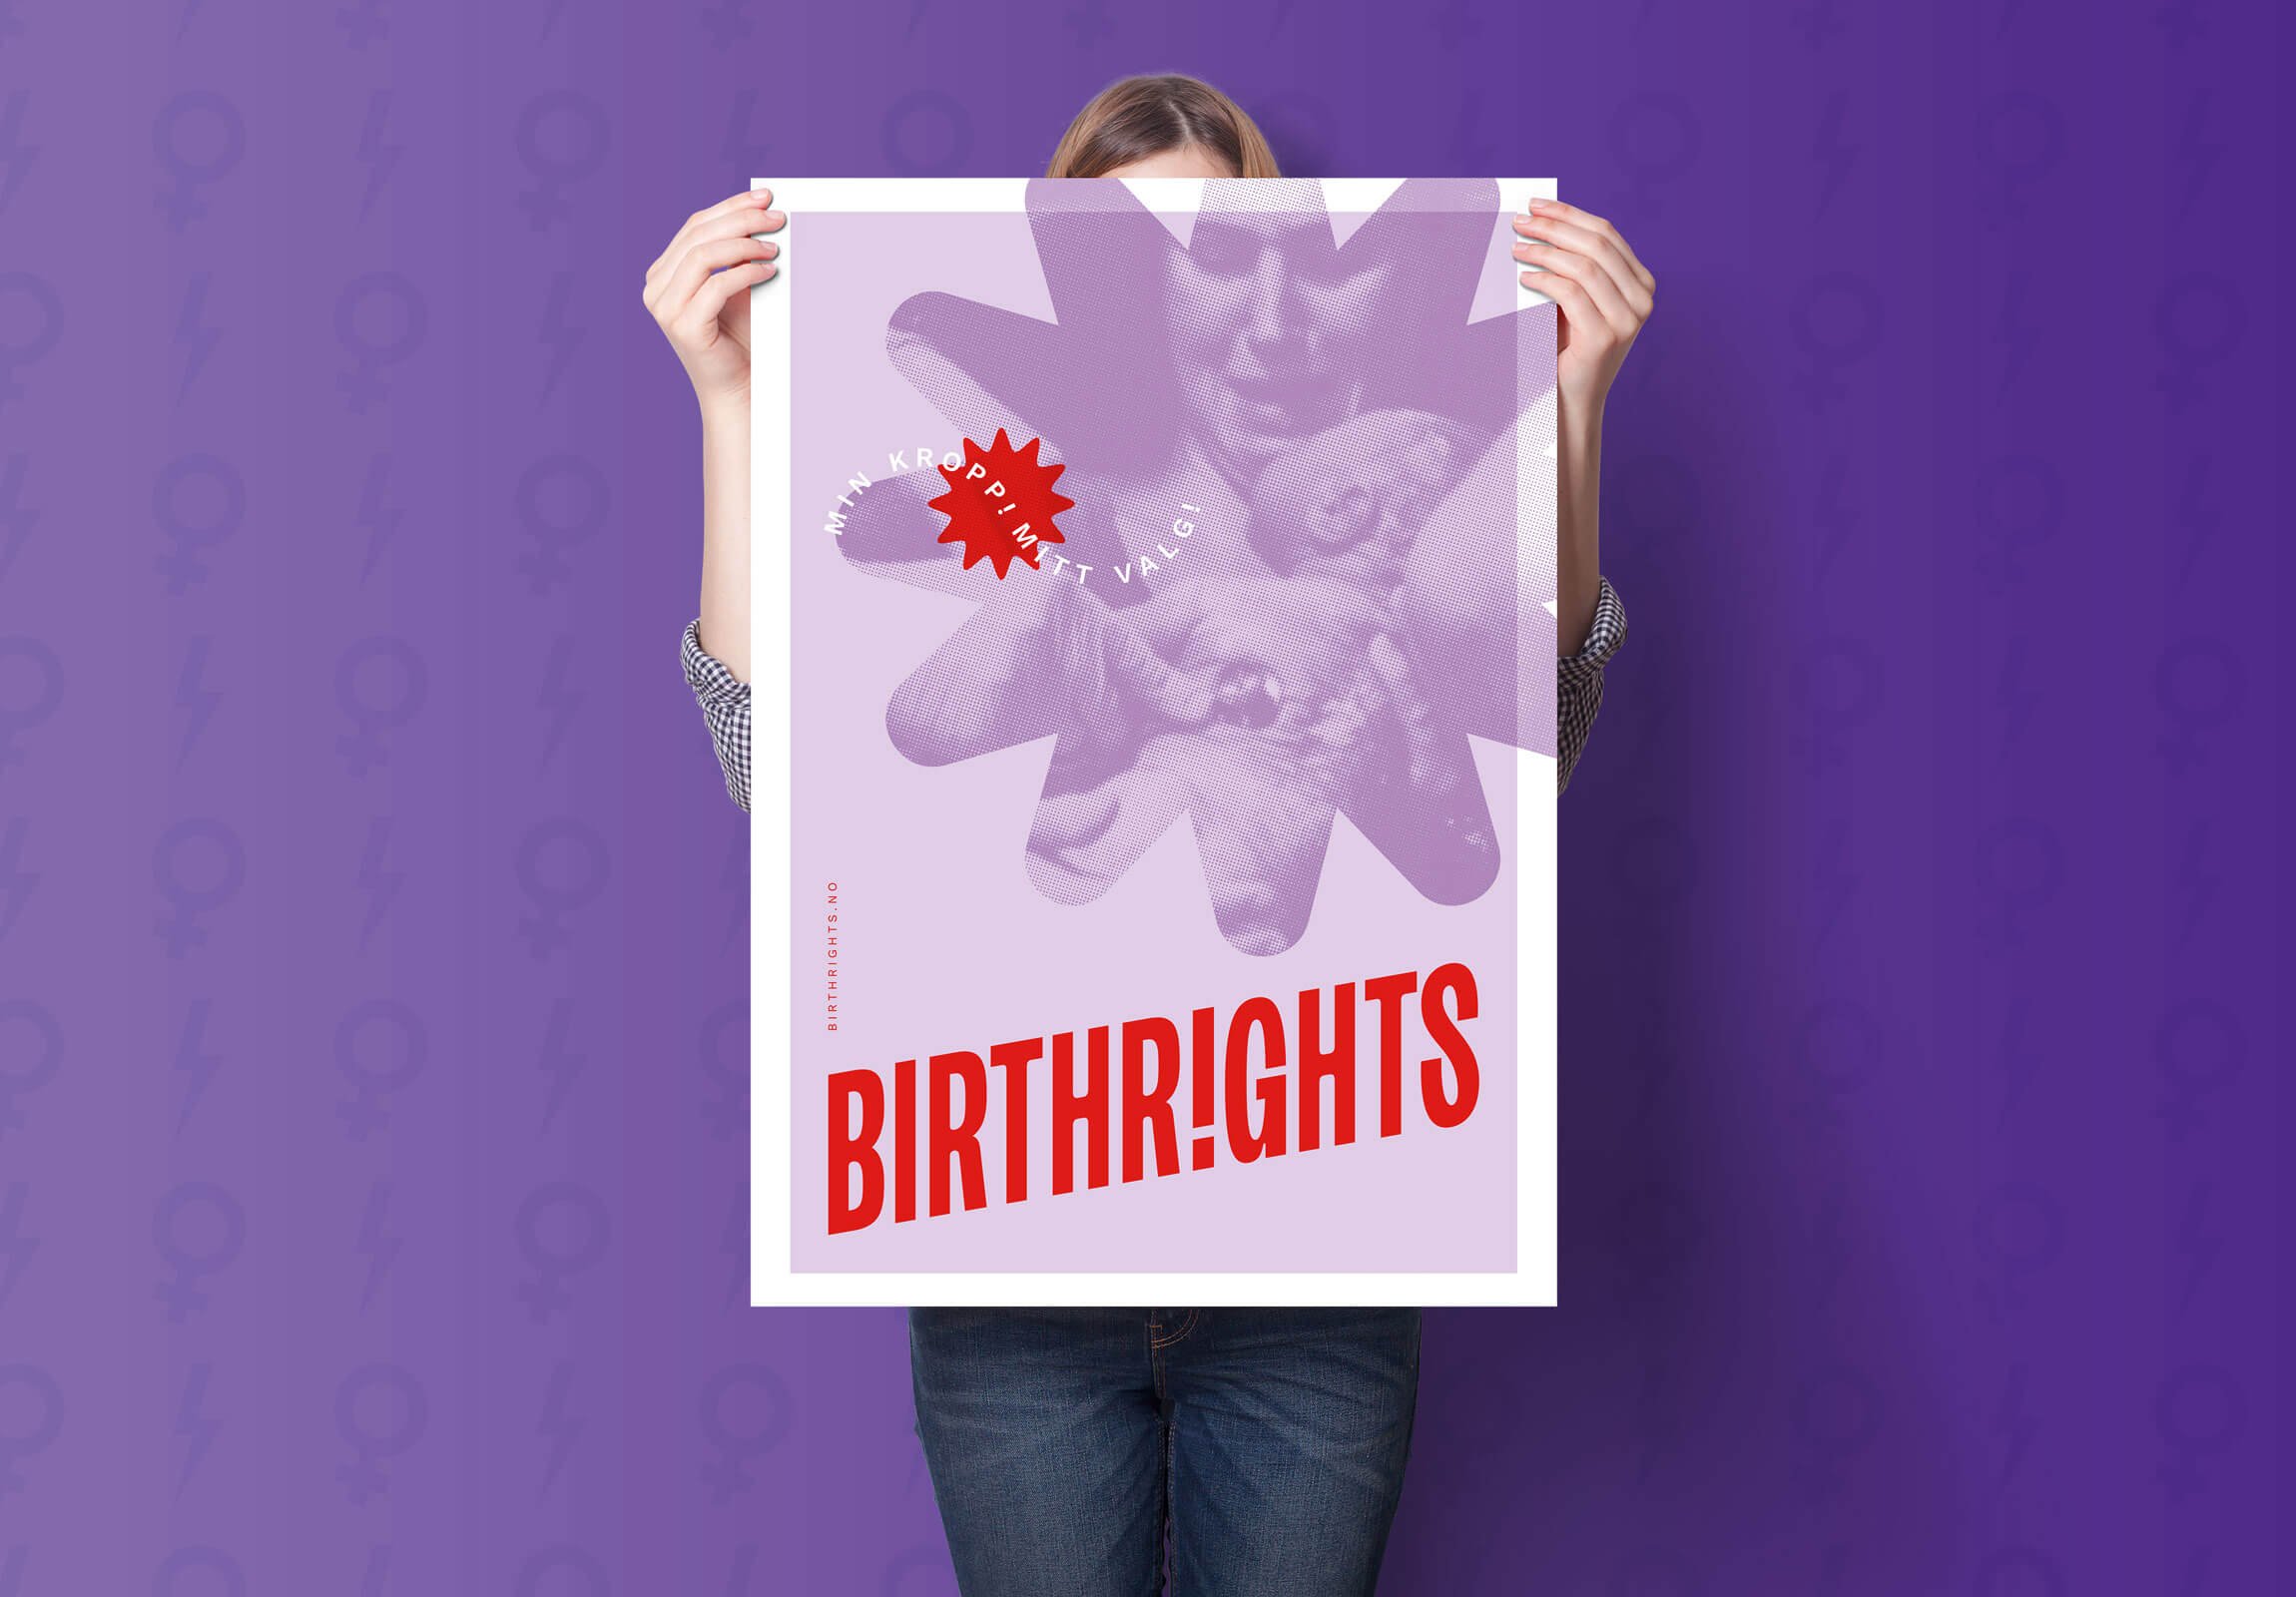 Trust Women, Protect Choice: BirthRights Norway Reveals Strategic Rebrand by Petchy